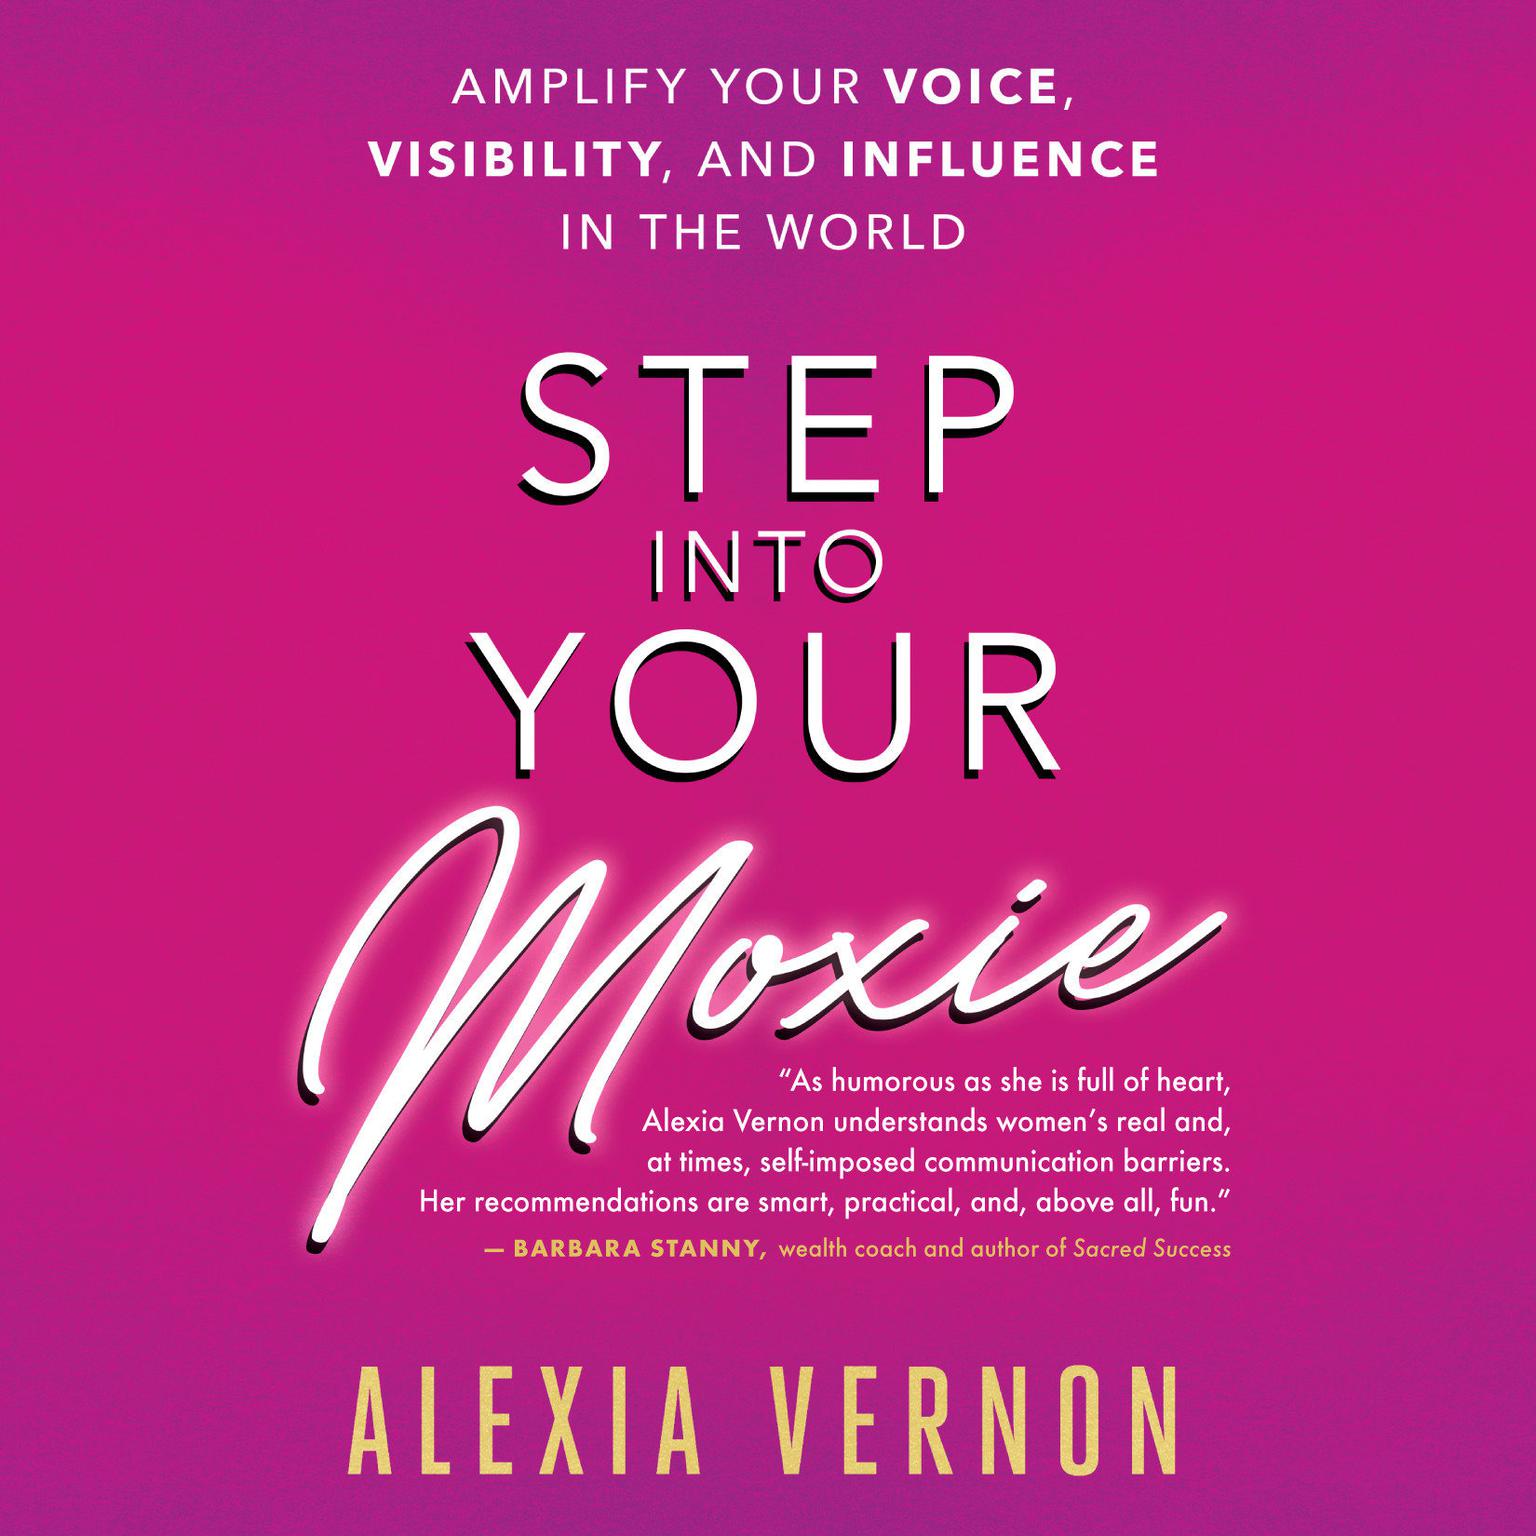 Step Into Your Moxie: A Holistic Approach to Amplify Your Voice, Visibility, and Influence in the World Audiobook, by Alexia Vernon